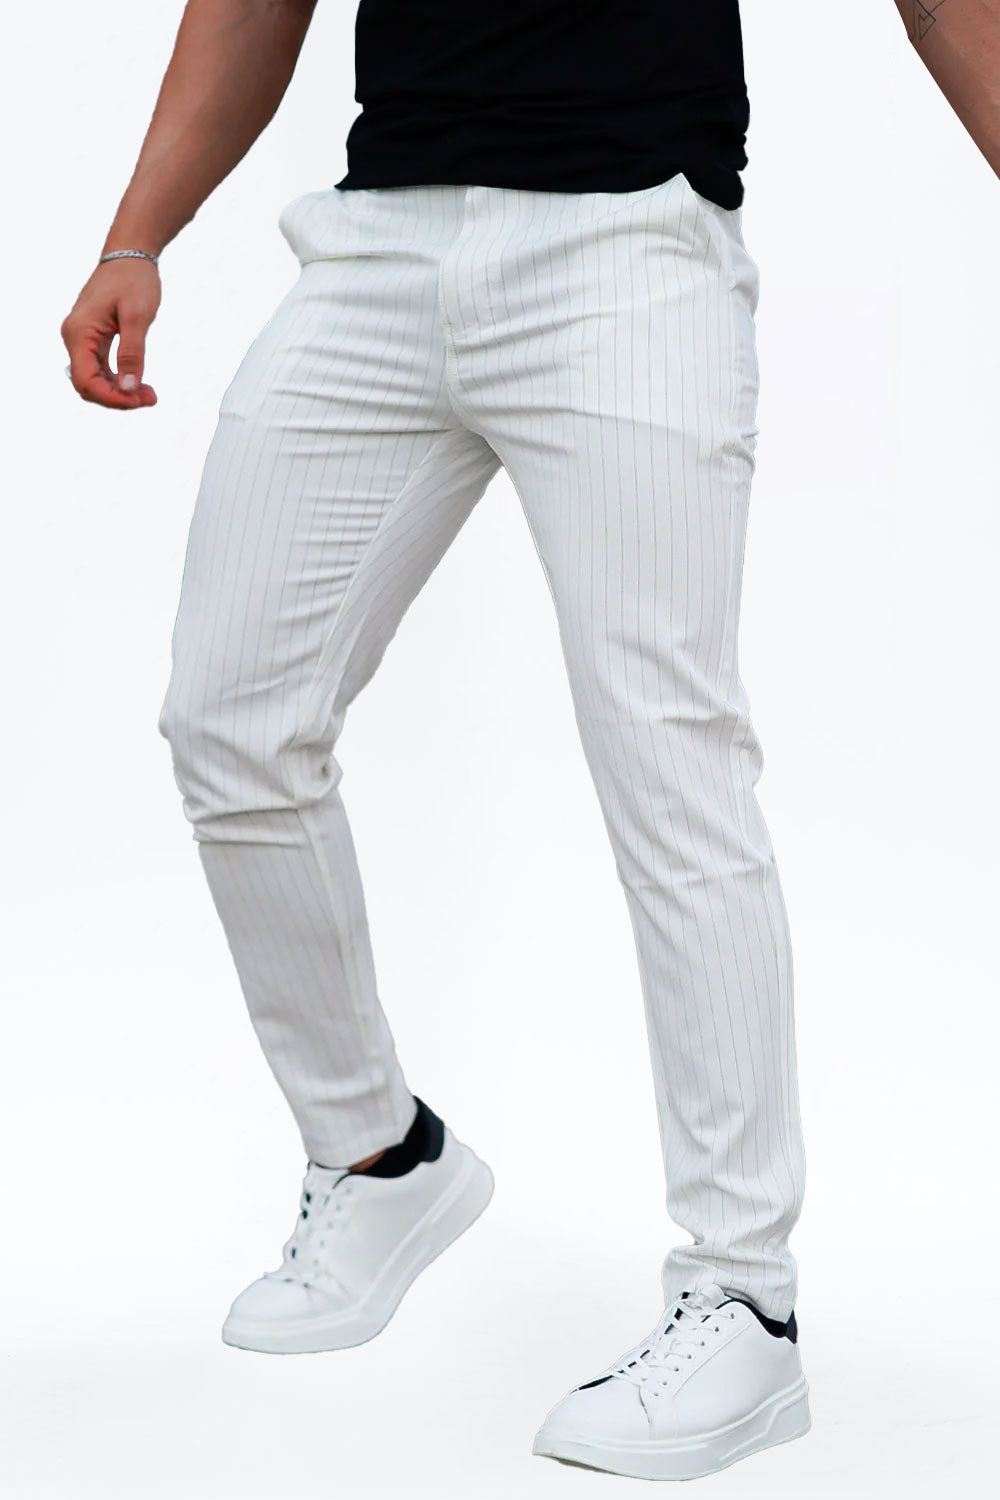 Gingtto Mens Vertical Stripe Chinos White Stretch Chino Pants For Men